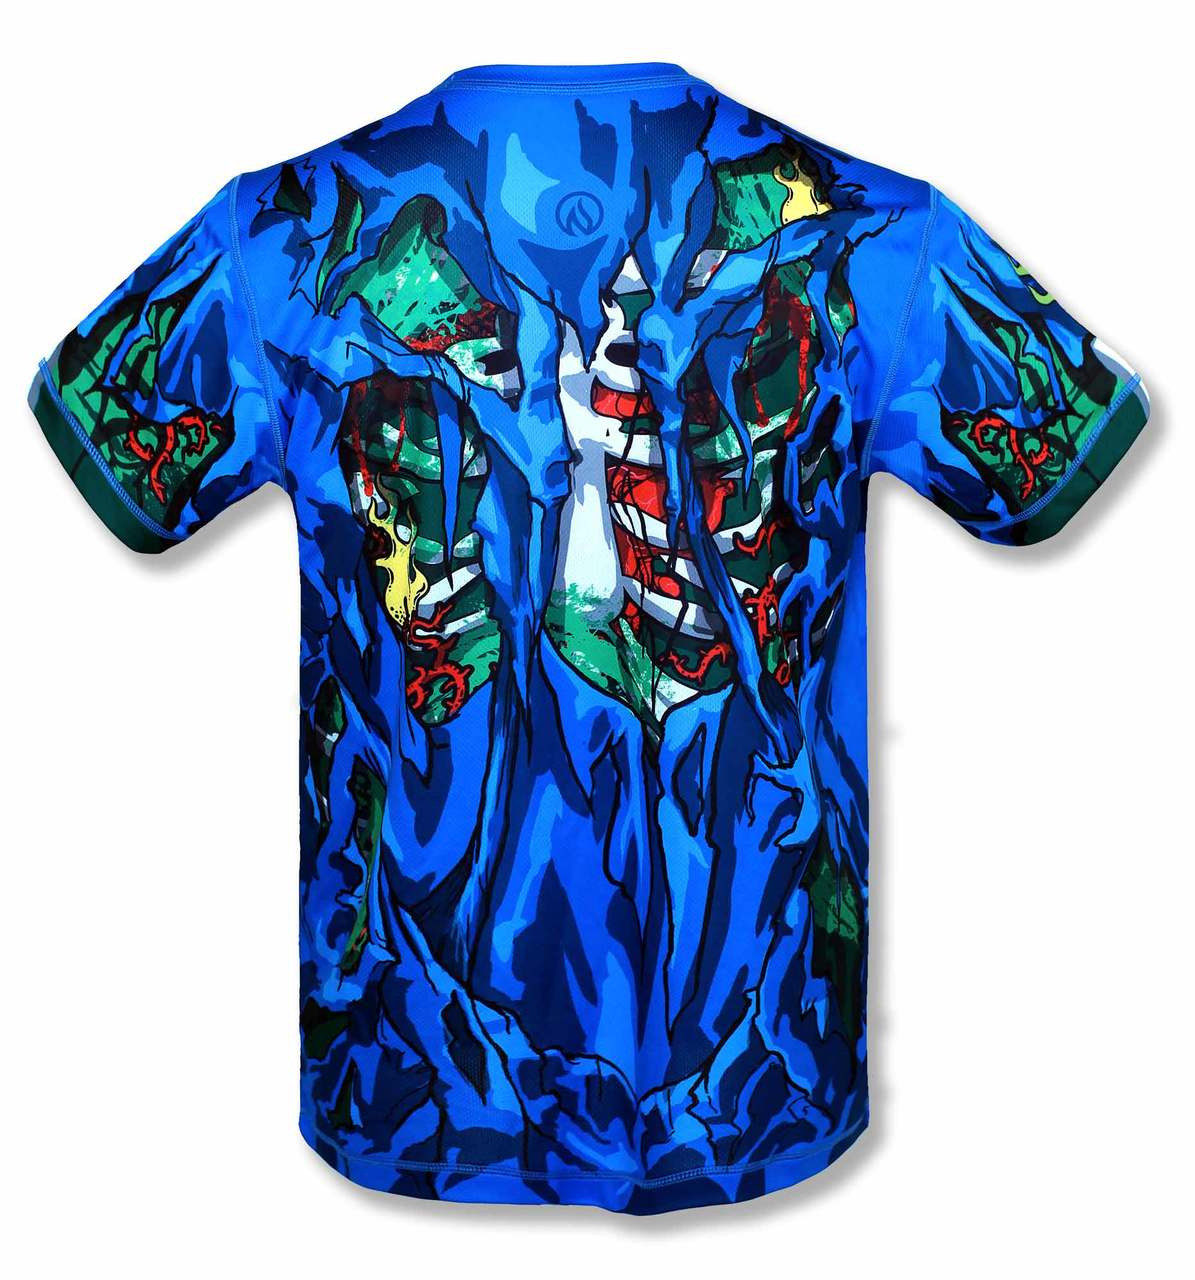 INKnBURN Men's Zombie Tech Shirt for running, gym & crossfit workout